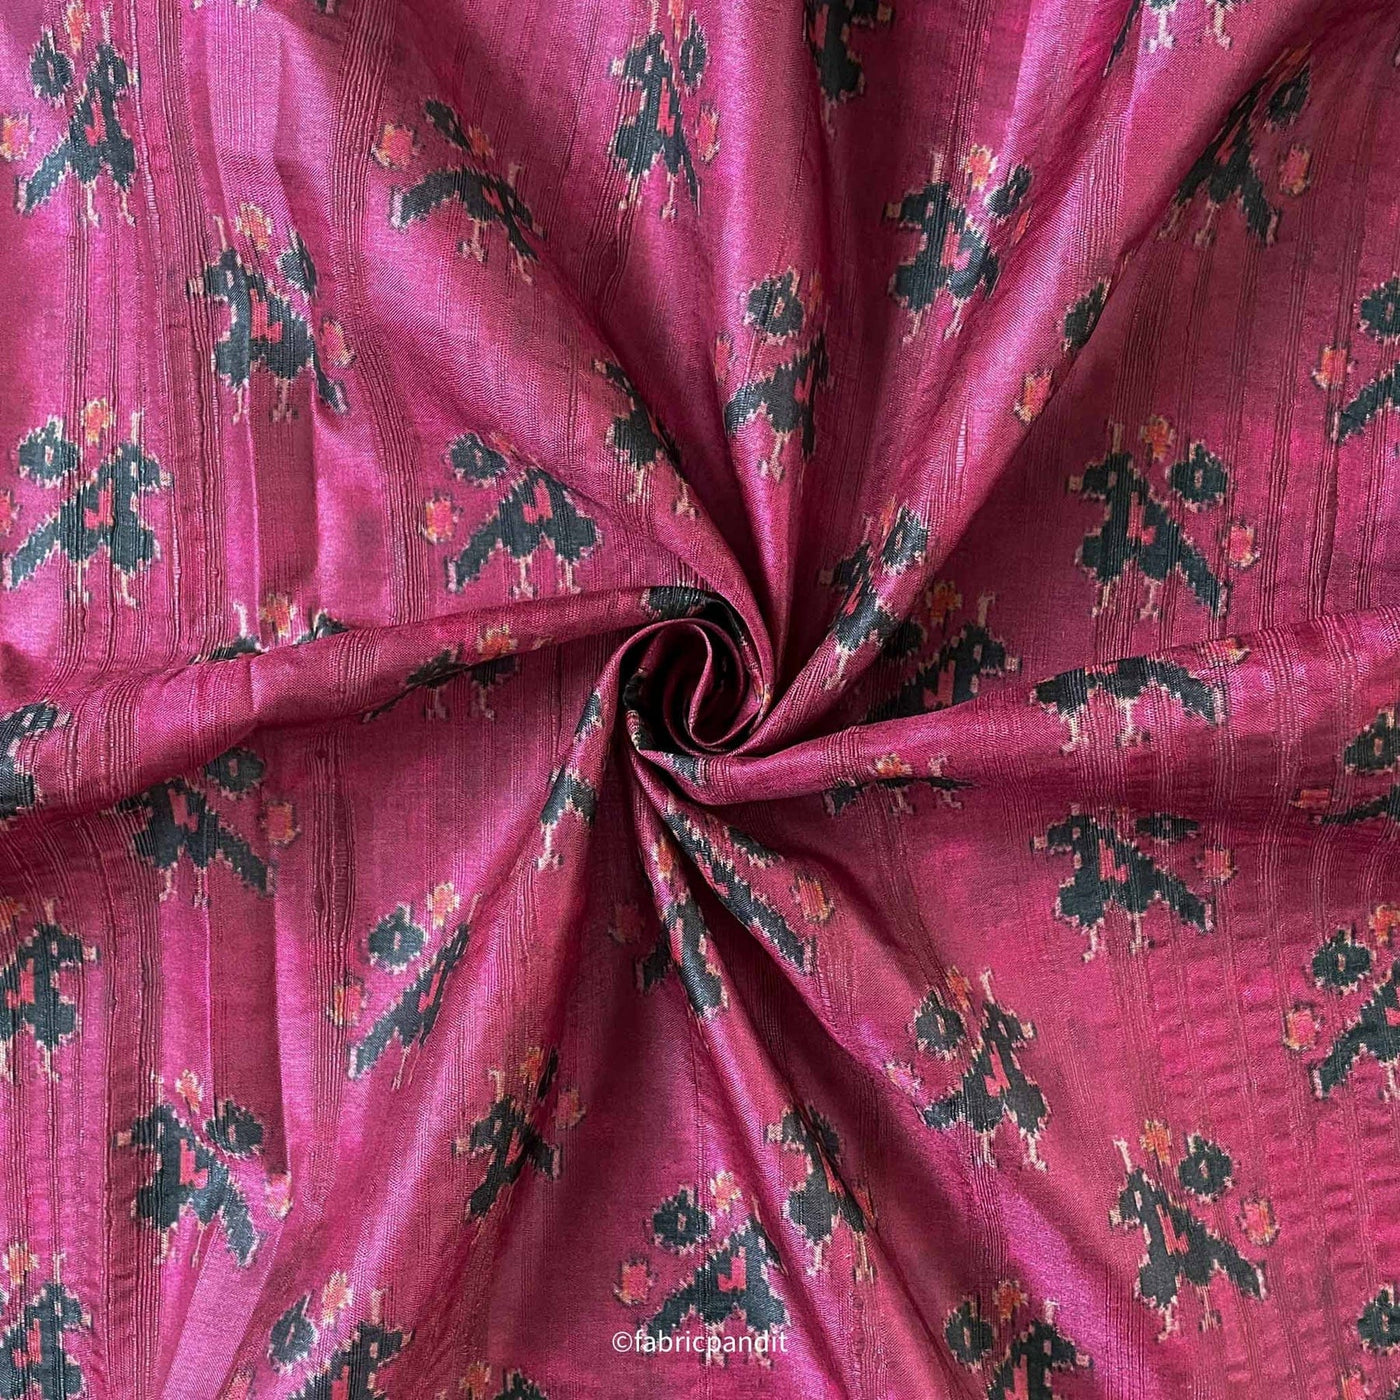 Fabric Pandit Fabric Classic Magenta Abstract Parrot Digital Printed Tussar Silk Fabric (Width 44 Inches)